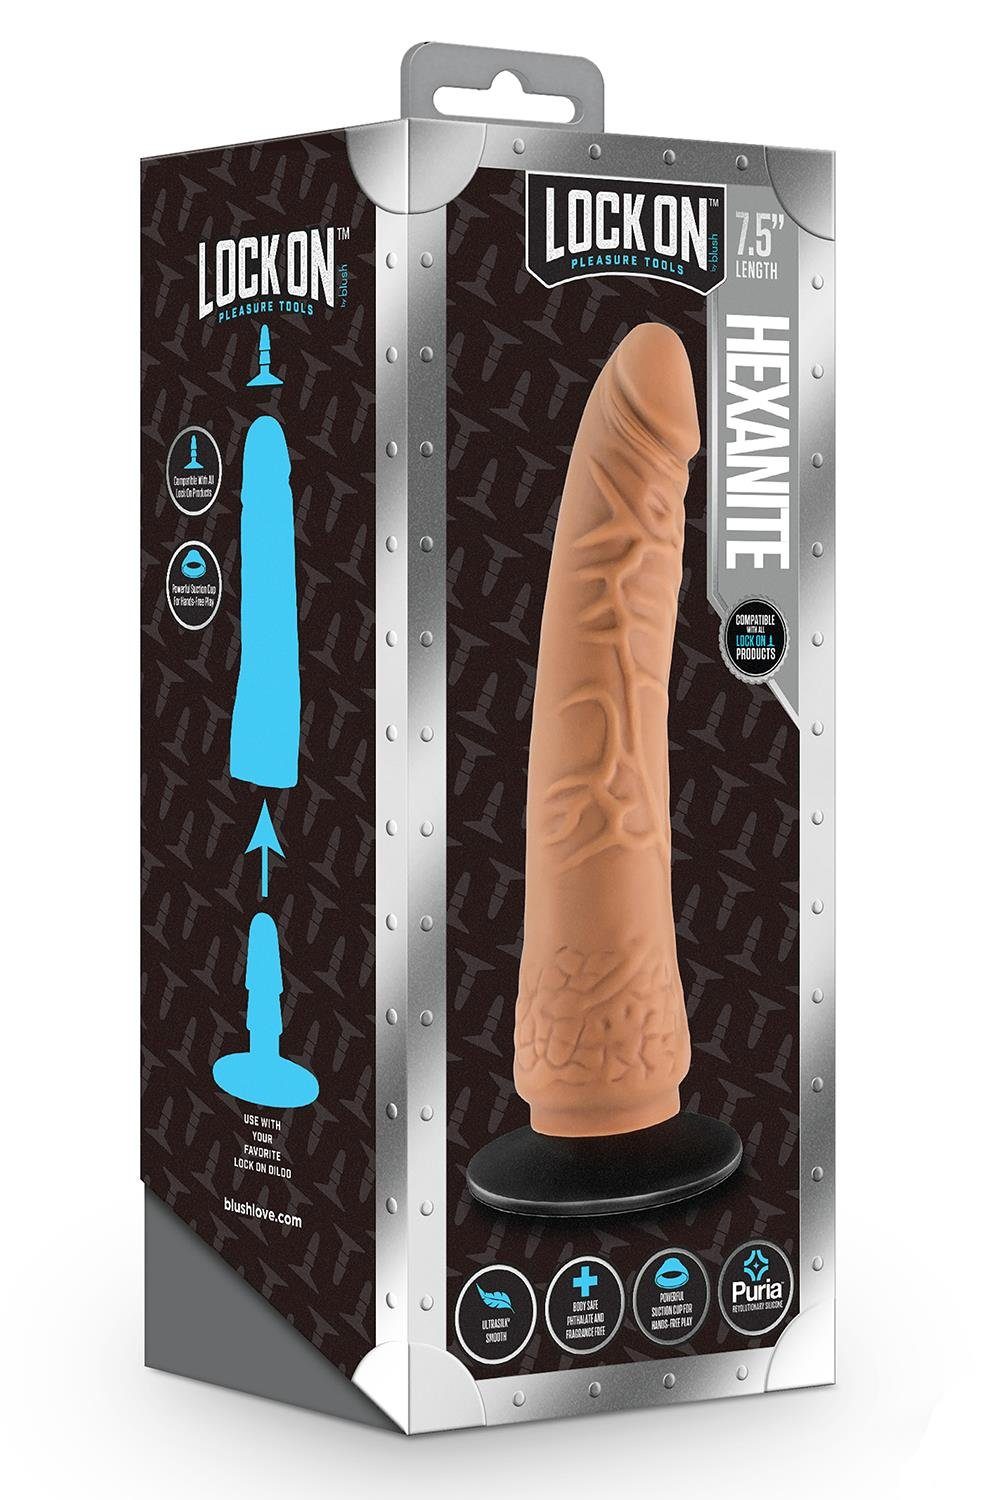 Suction Lock 19cm With Mocha Hexanite Cup Dildo Blush 7.5 On Dildo Adapter Inch